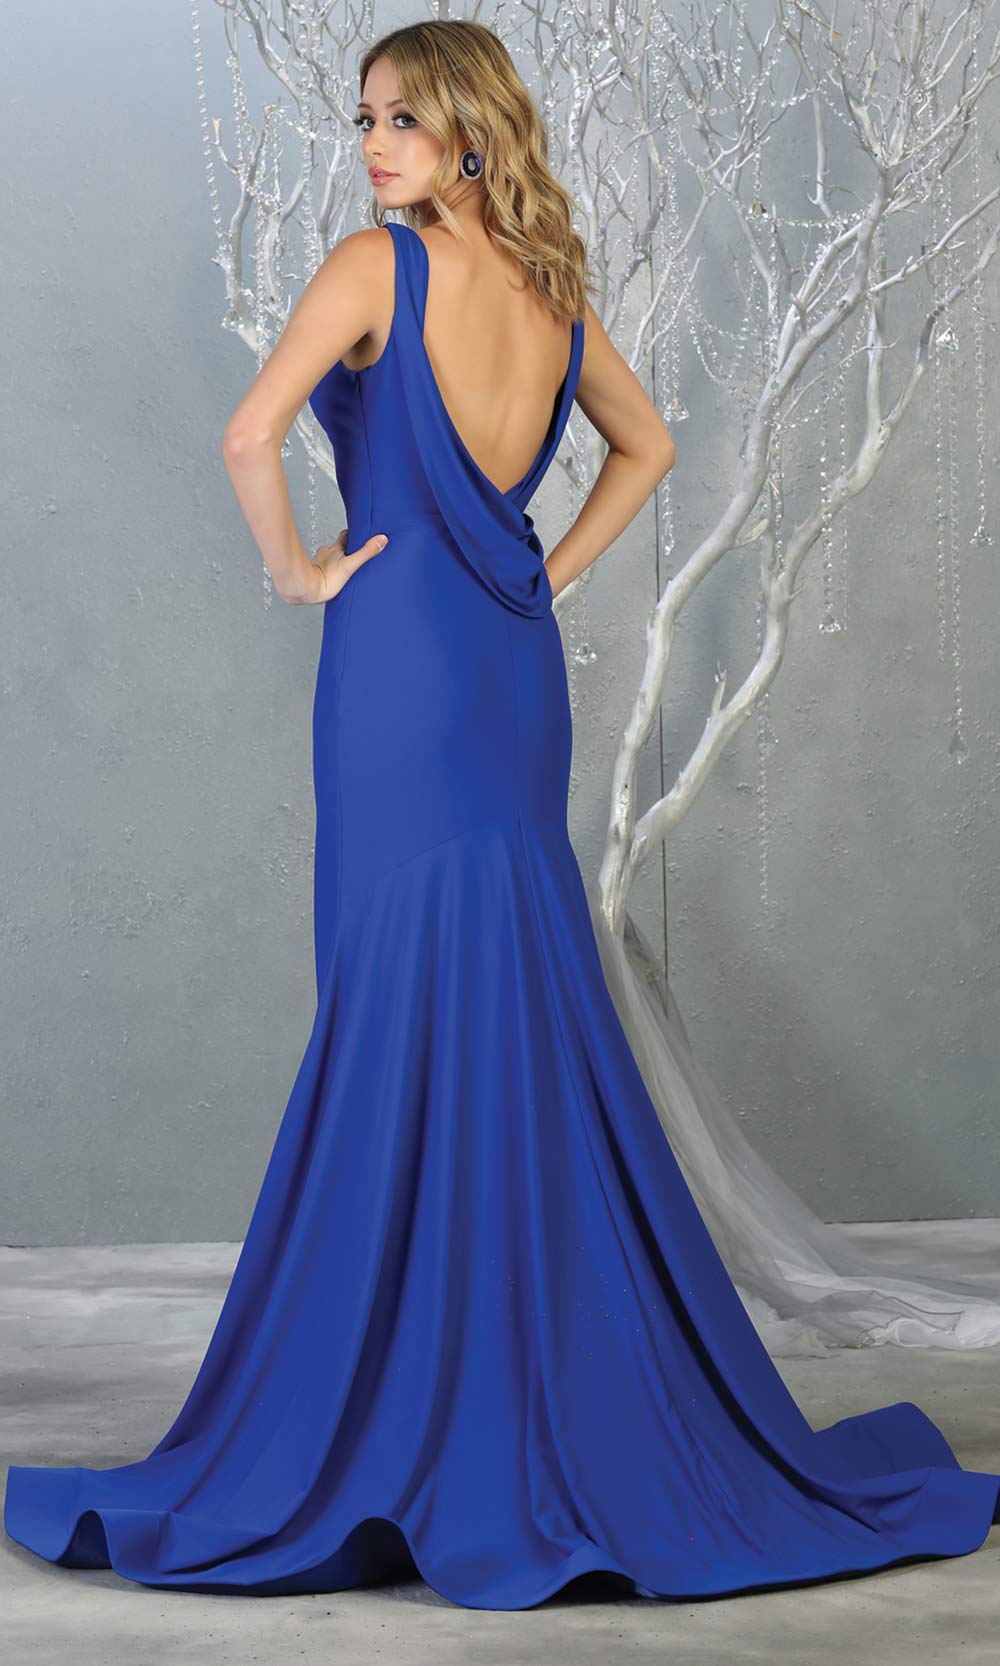 Mayqueen MQ1719 long sleek & sexy royal blue dress w/ low v neck. This tight fitted mermaid dress w/low back. Royal blue formal gown is perfect for prom, engagement/e-shoot dress, formal wedding guest dress, gala, black tie event.Plus sizes avail-b.jpg